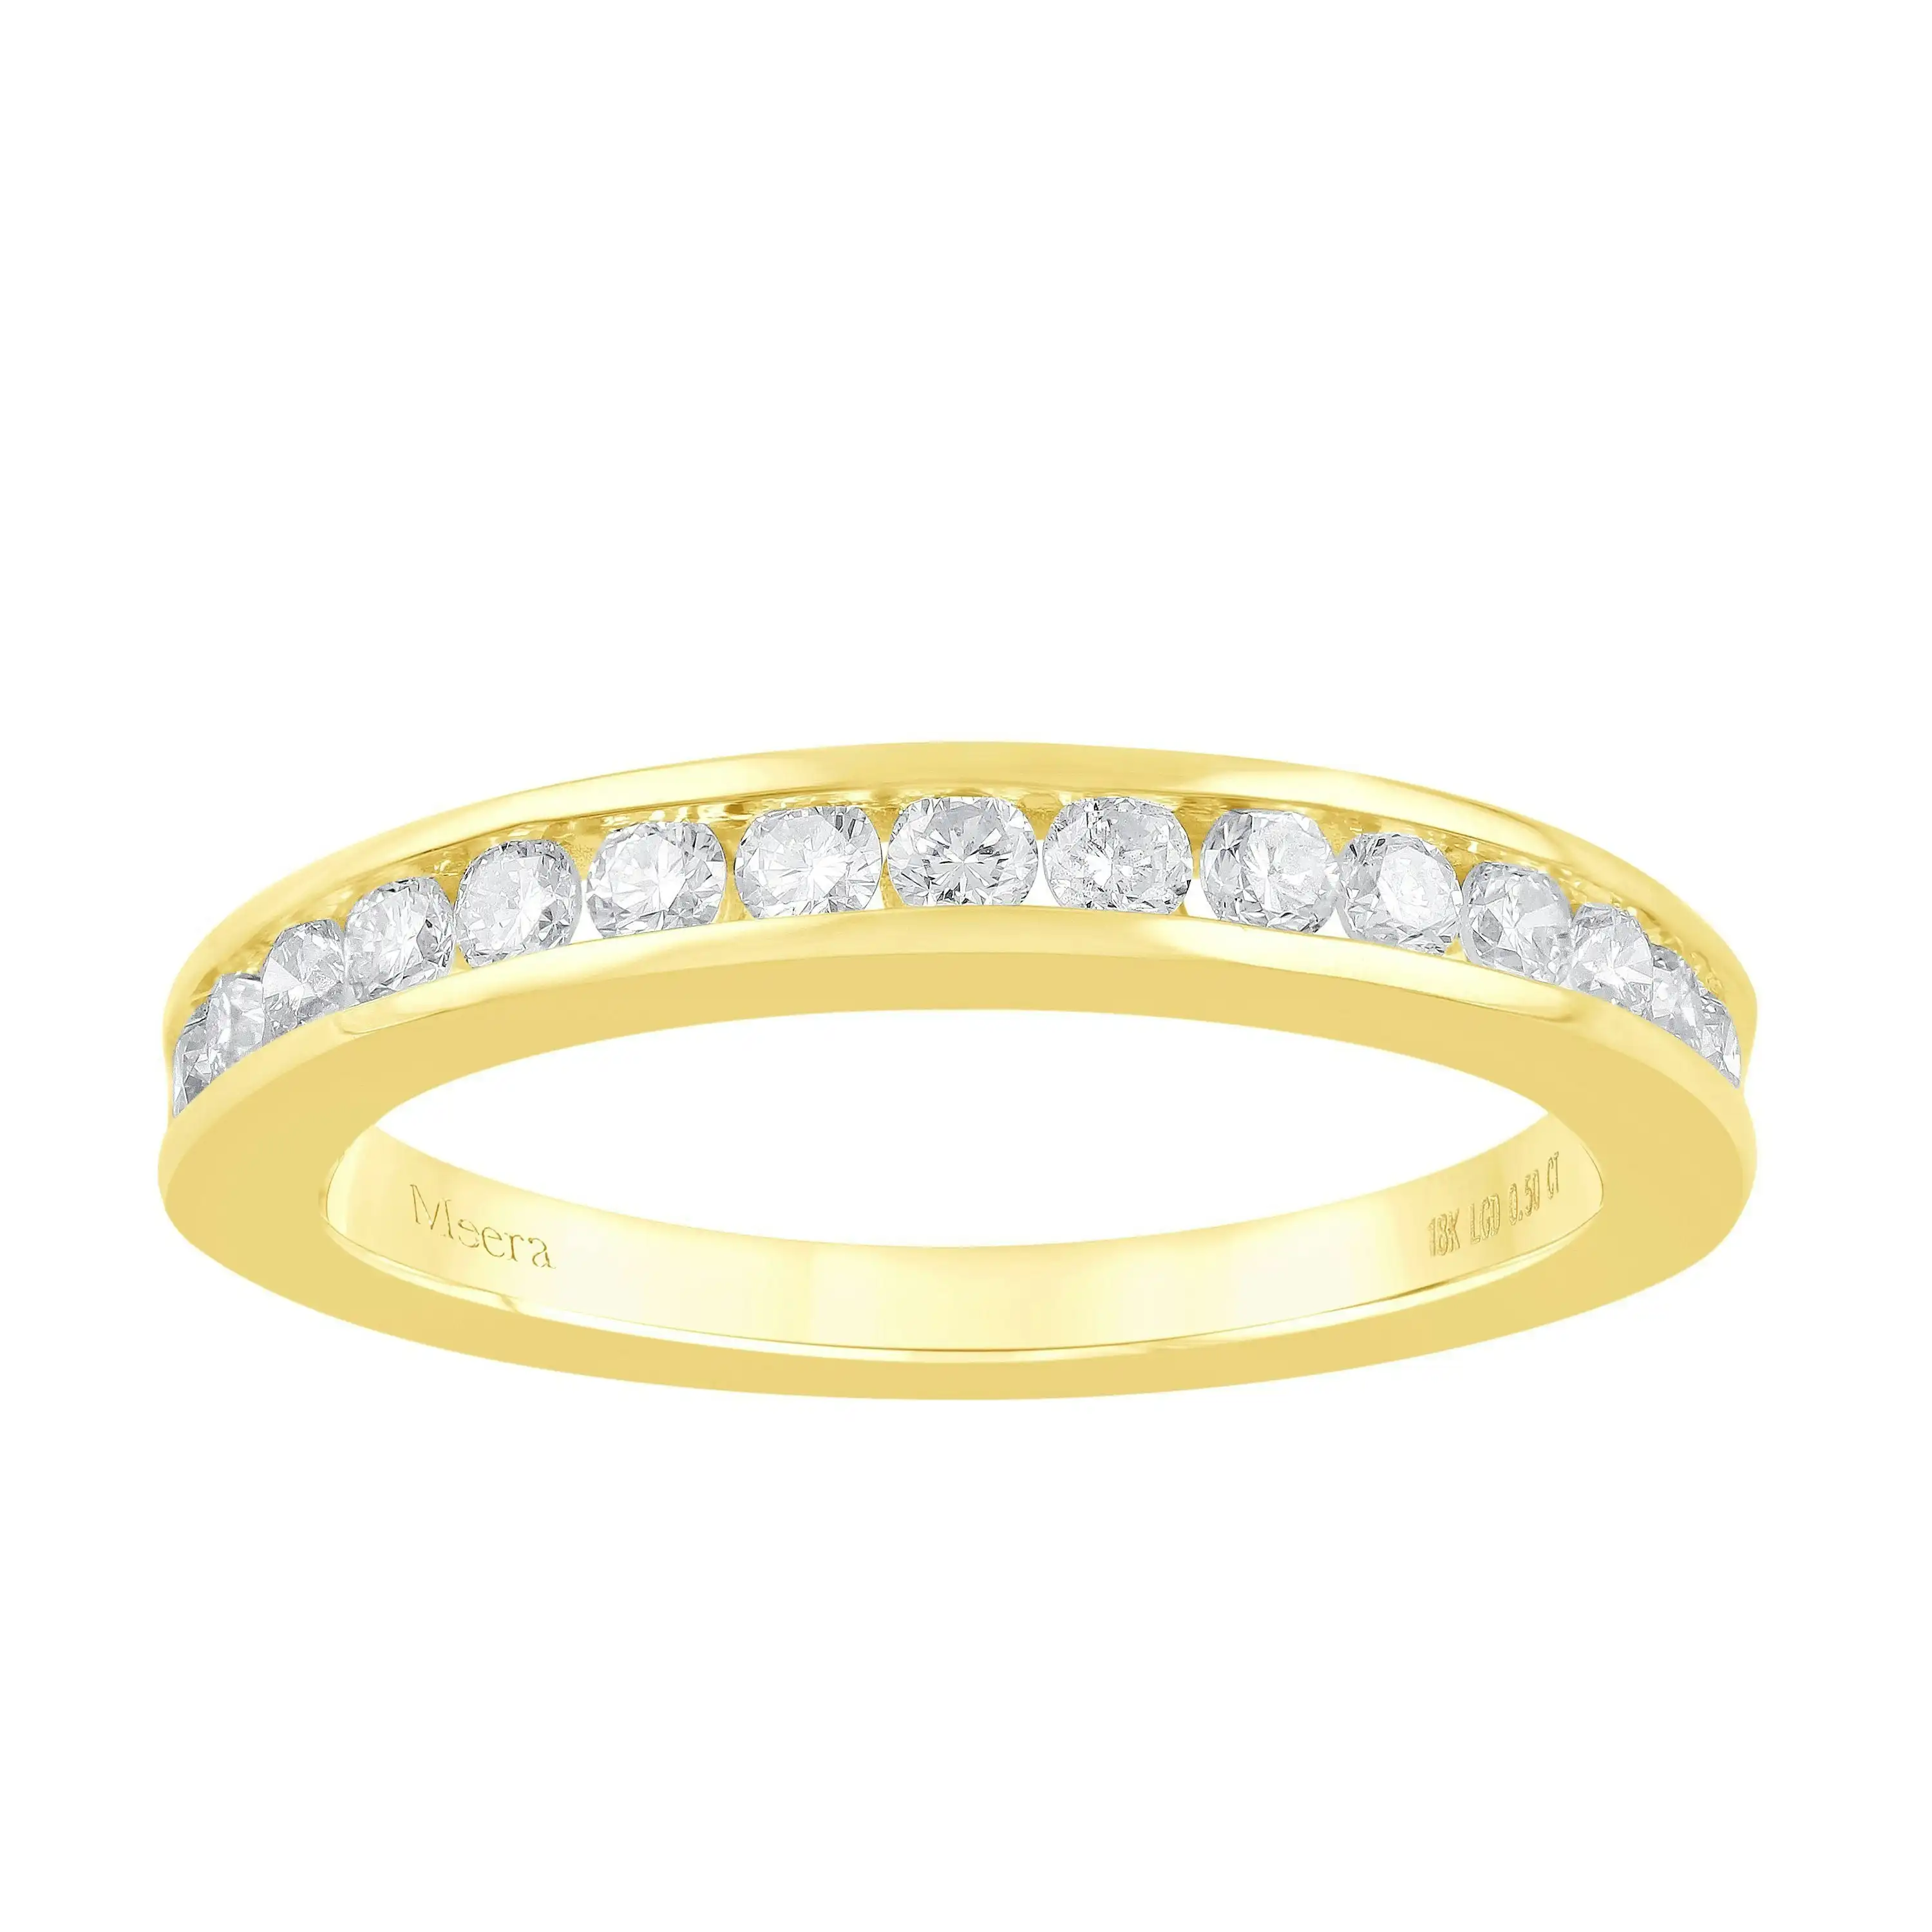 Meera Eternity Ring with 1/2ct of Laboratory Grown Diamonds in 18ct Yellow Gold